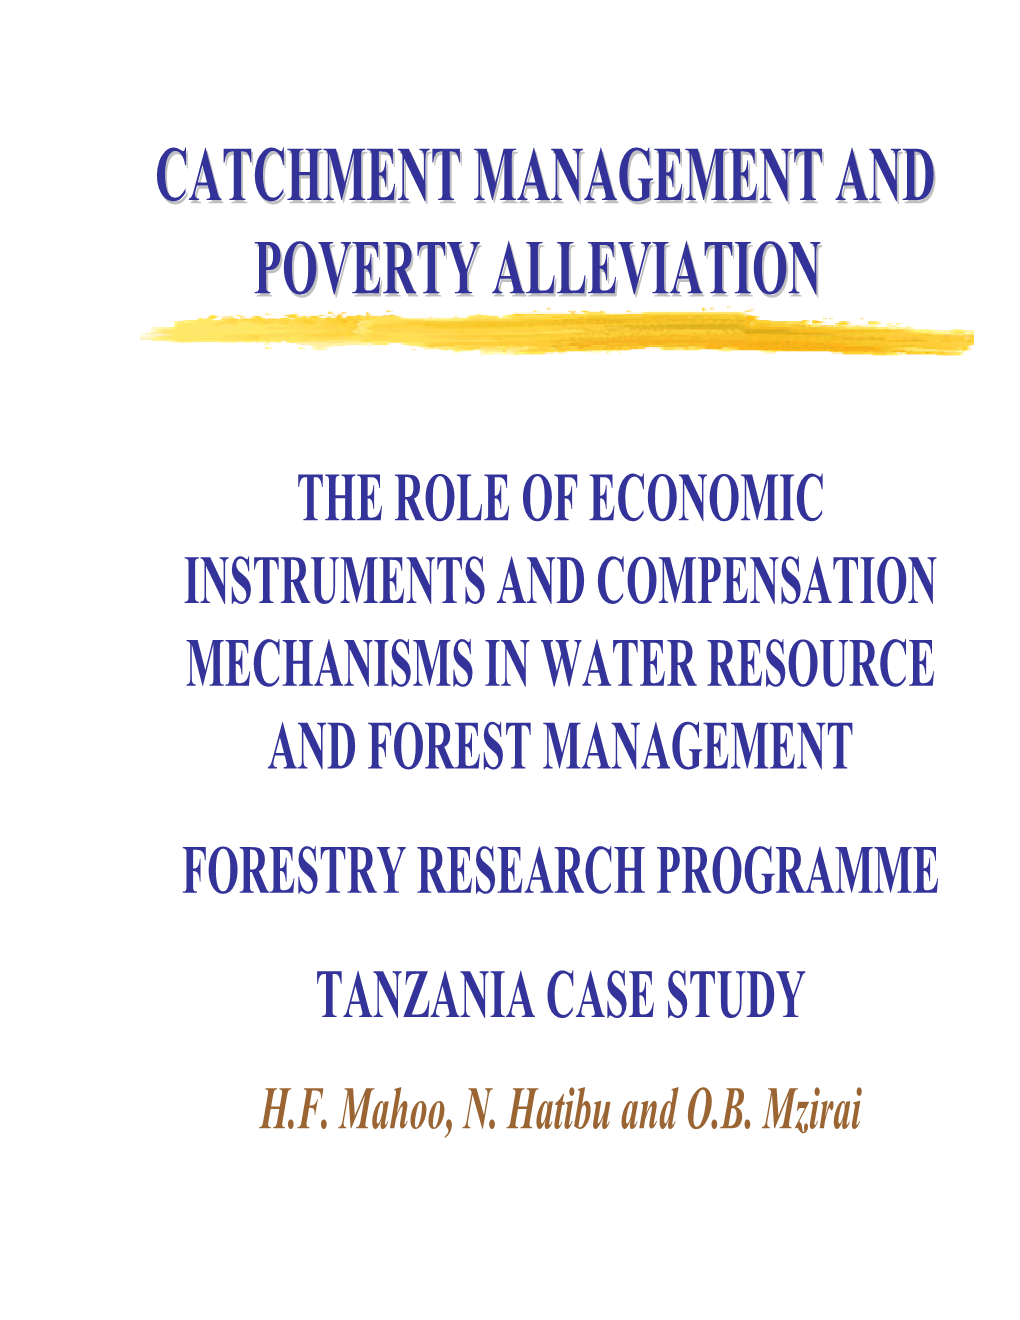 Catchment Management and Poverty Alleviation